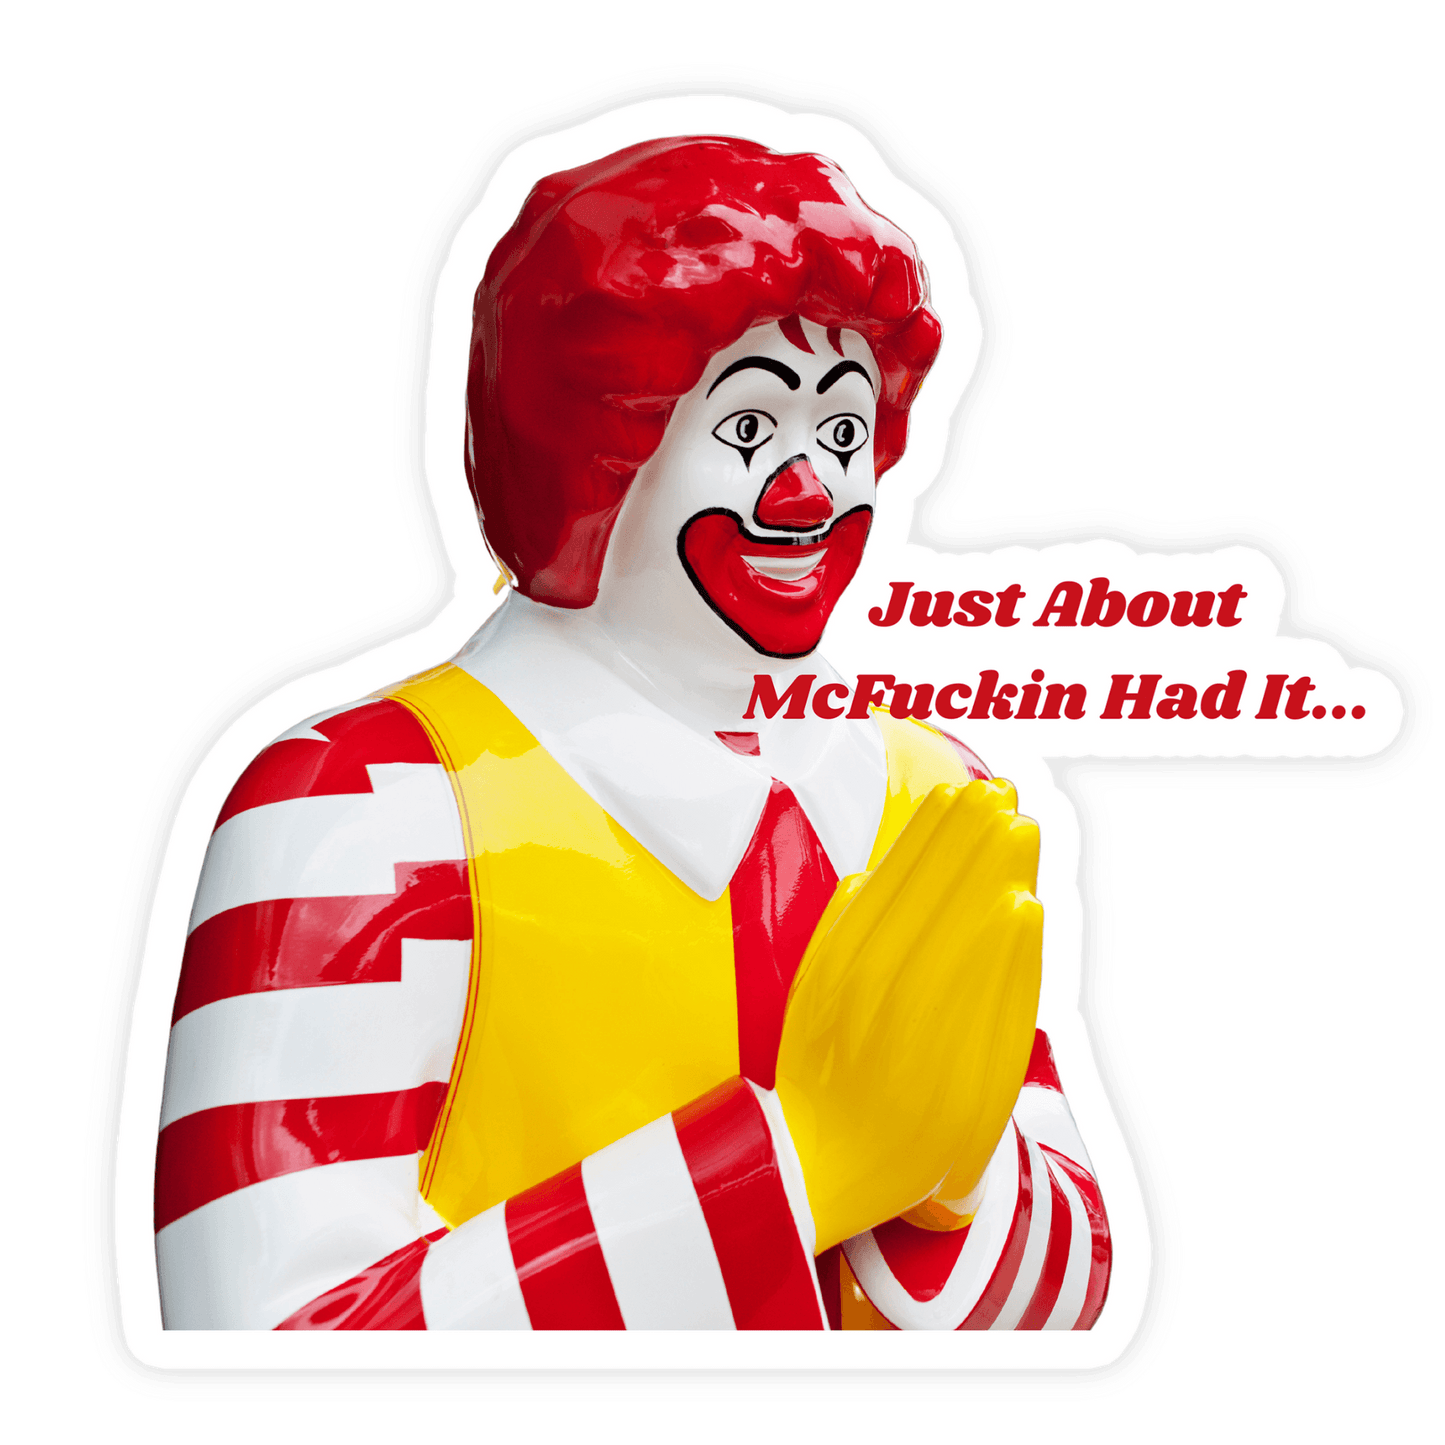 Ronald mcdonald sticker looking character saying I've just about mcfucking had it